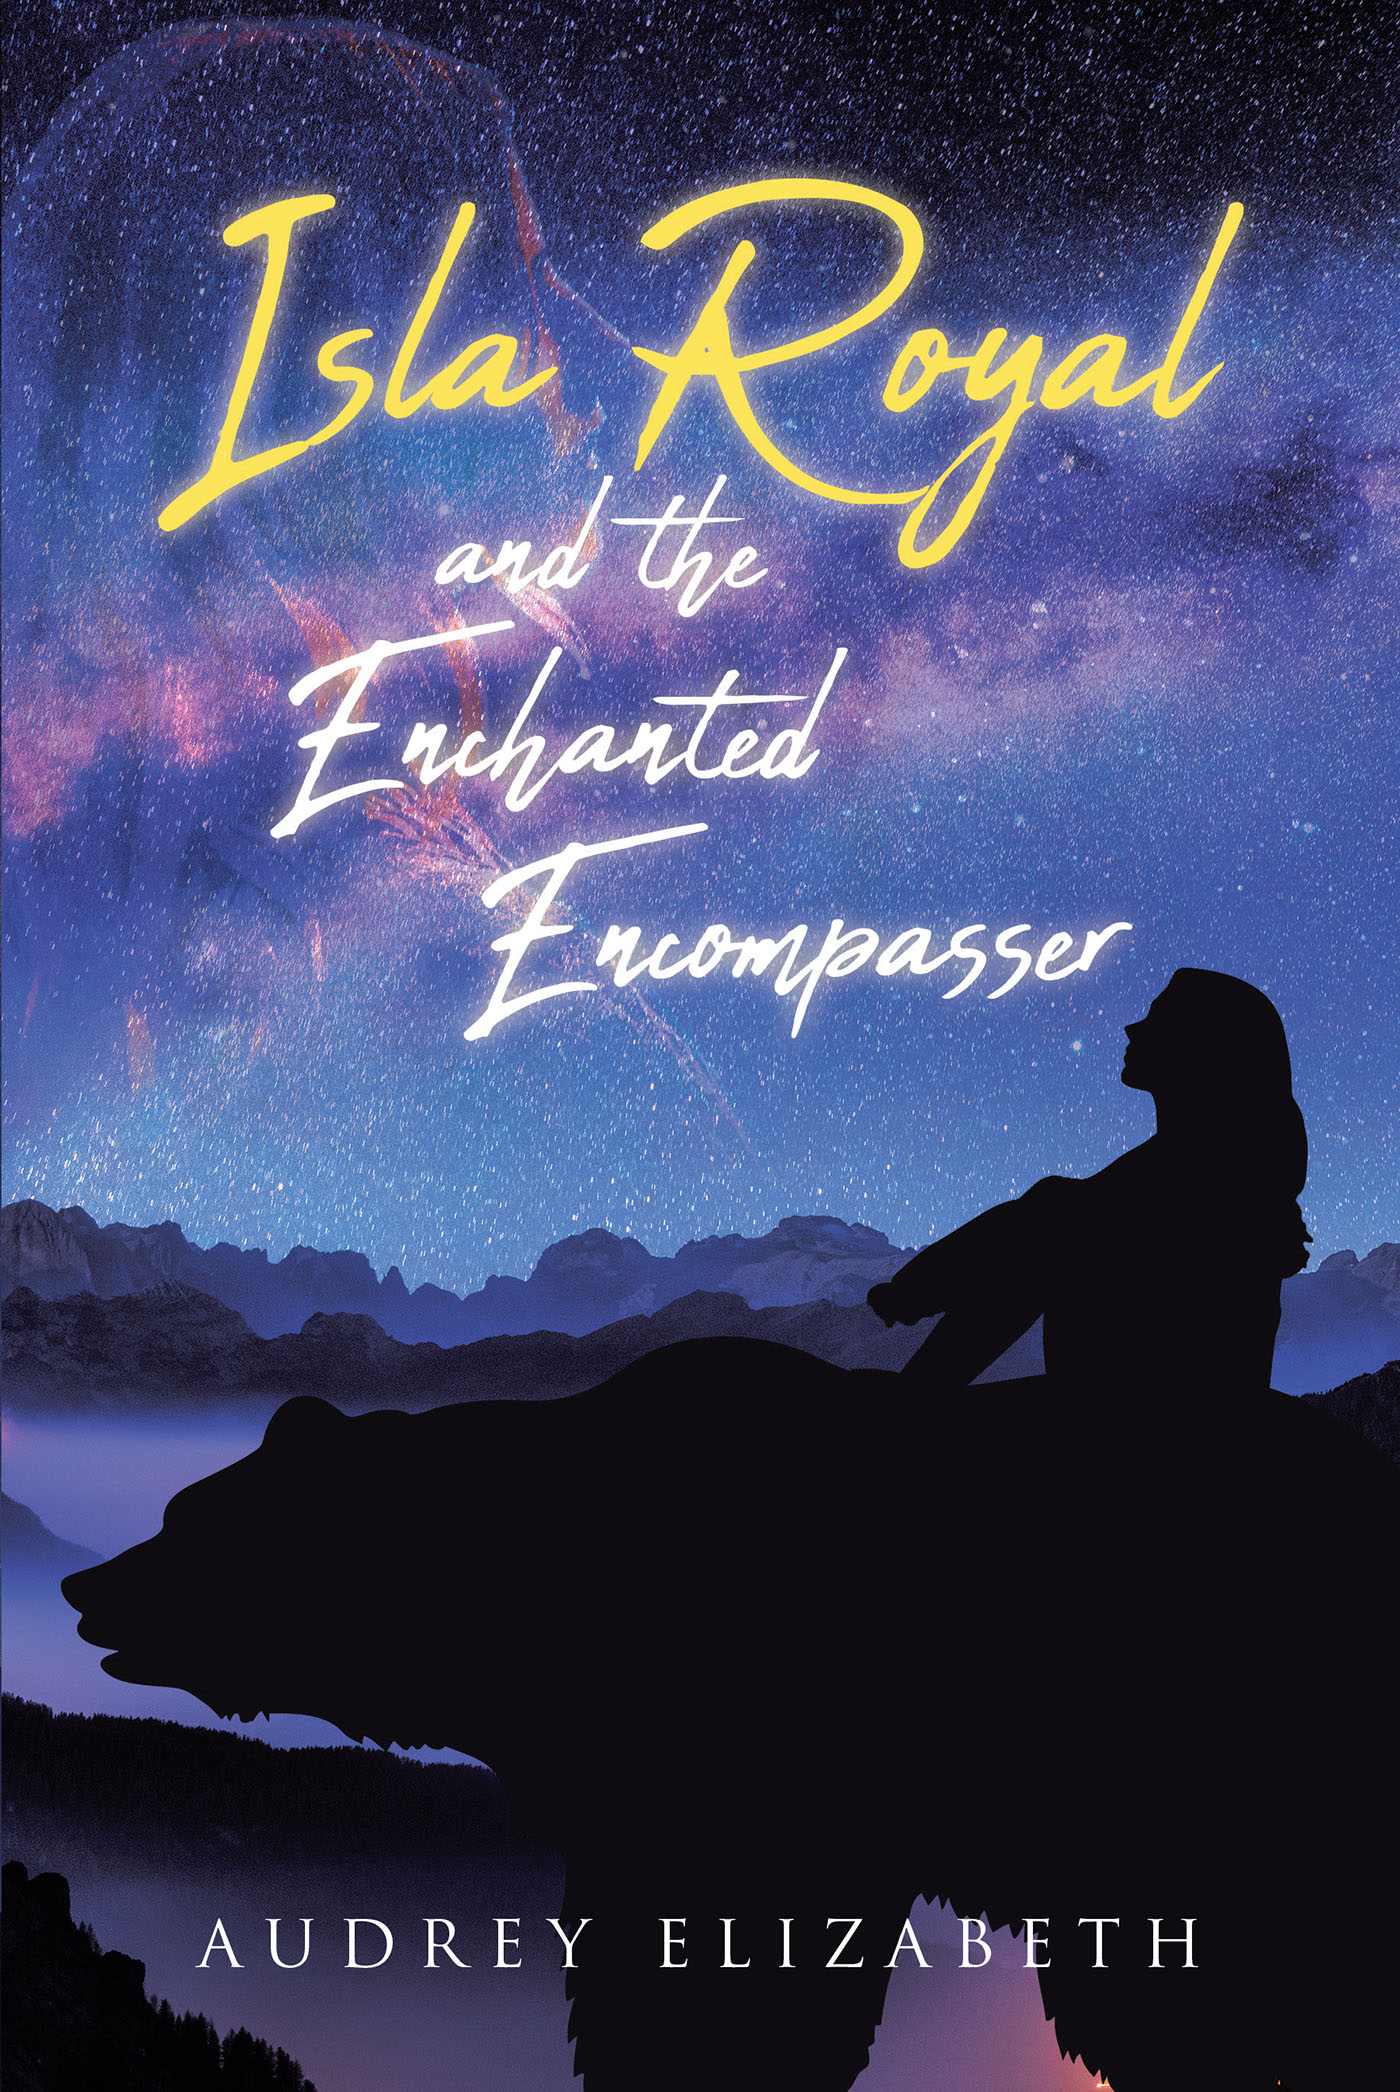 Audrey Elizabeth’s New Book, "Isla Royal and the Enchanted Encompasser," is a Whimsical Childhood Fantasy Story Turned Into an Engaging Adventure Novel